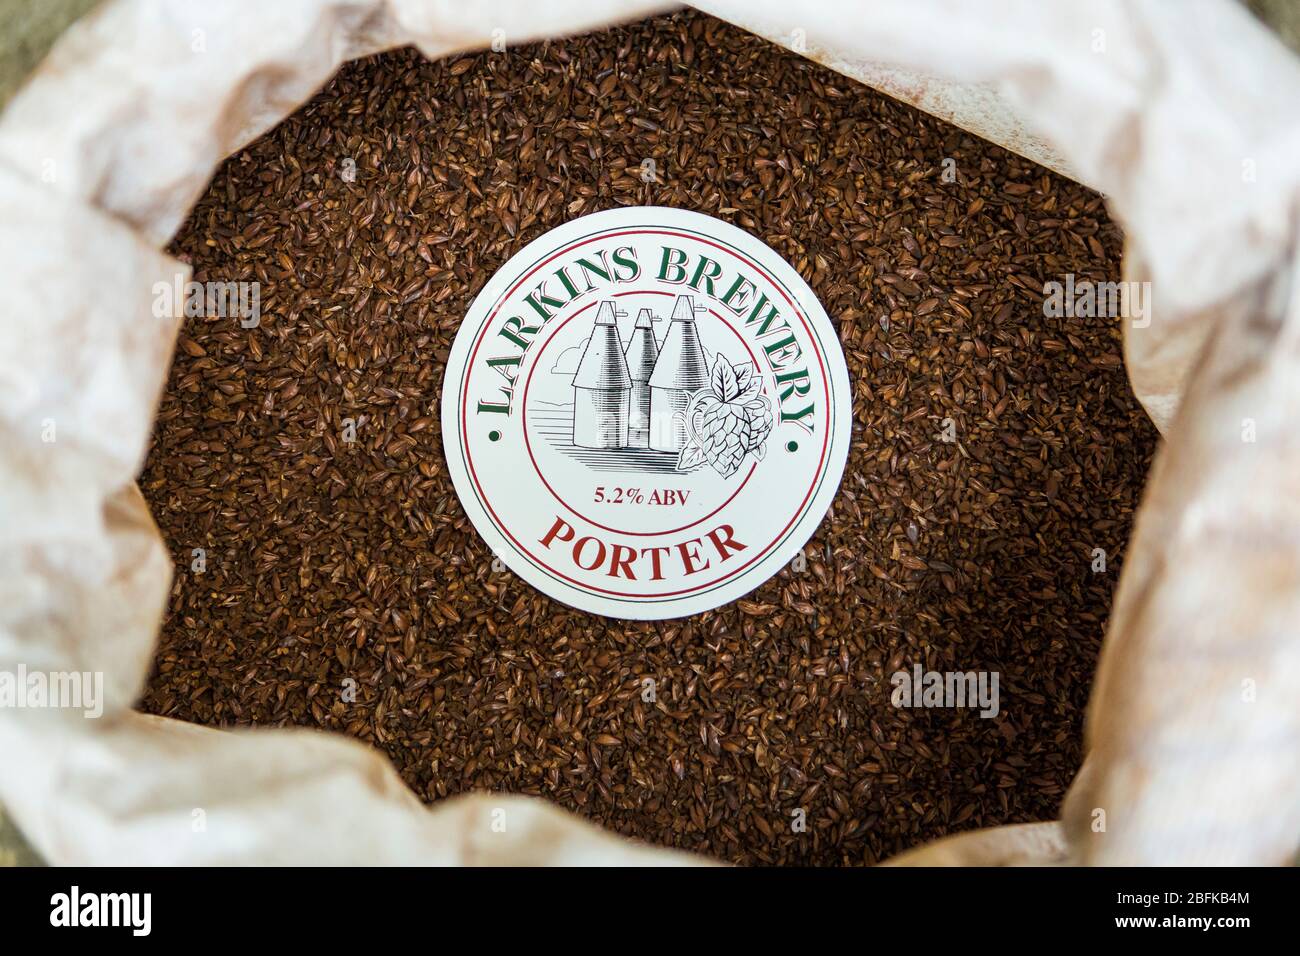 Toasted malted barley ready to brew up Larkins' award winning Porter by Larkins Brewery and hop farm in Chiddingstone, Kent, UK Stock Photo